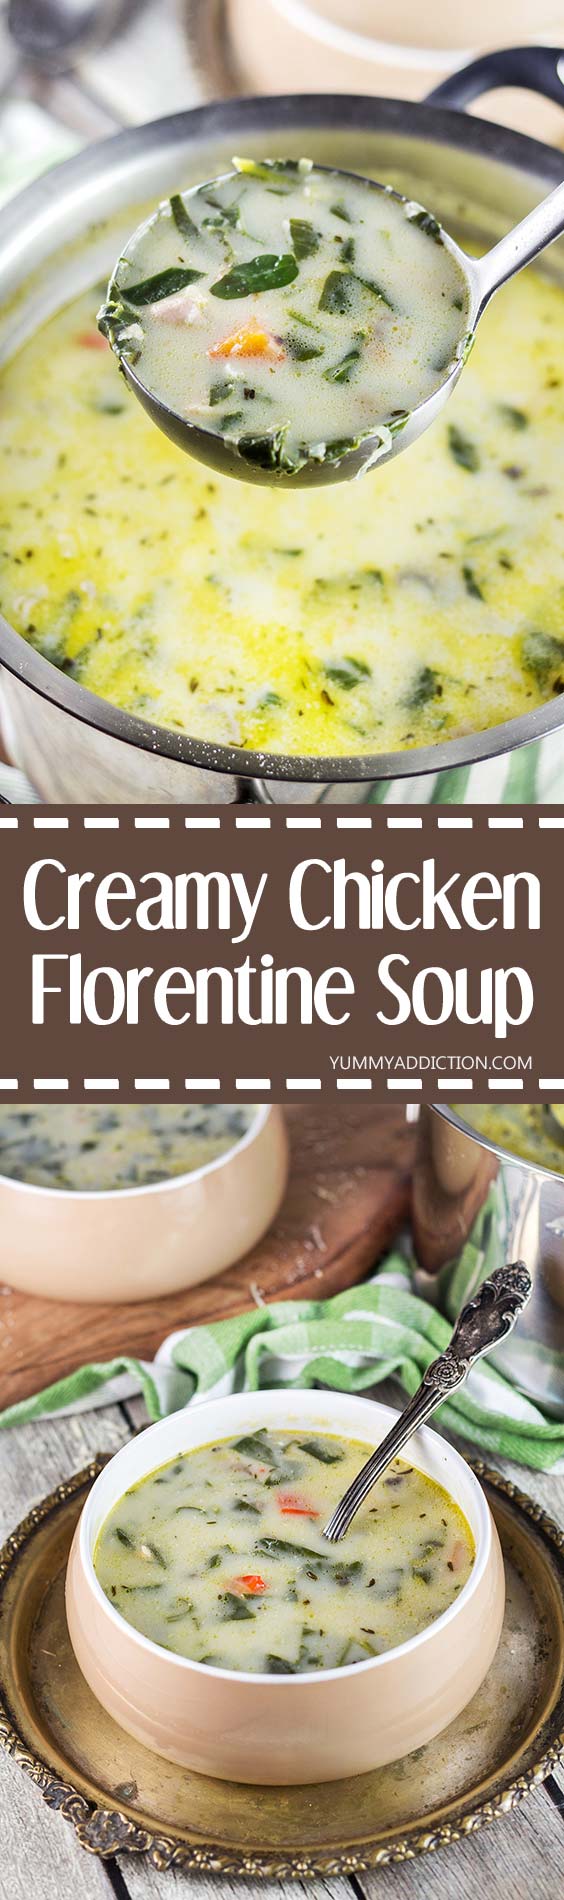 This Chicken Florentine Soup is perfect for chilly fall and winter days. Creamy, cheesy, and comforting, it is guaranteed to warm you up from the inside! | yummyaddiction.com